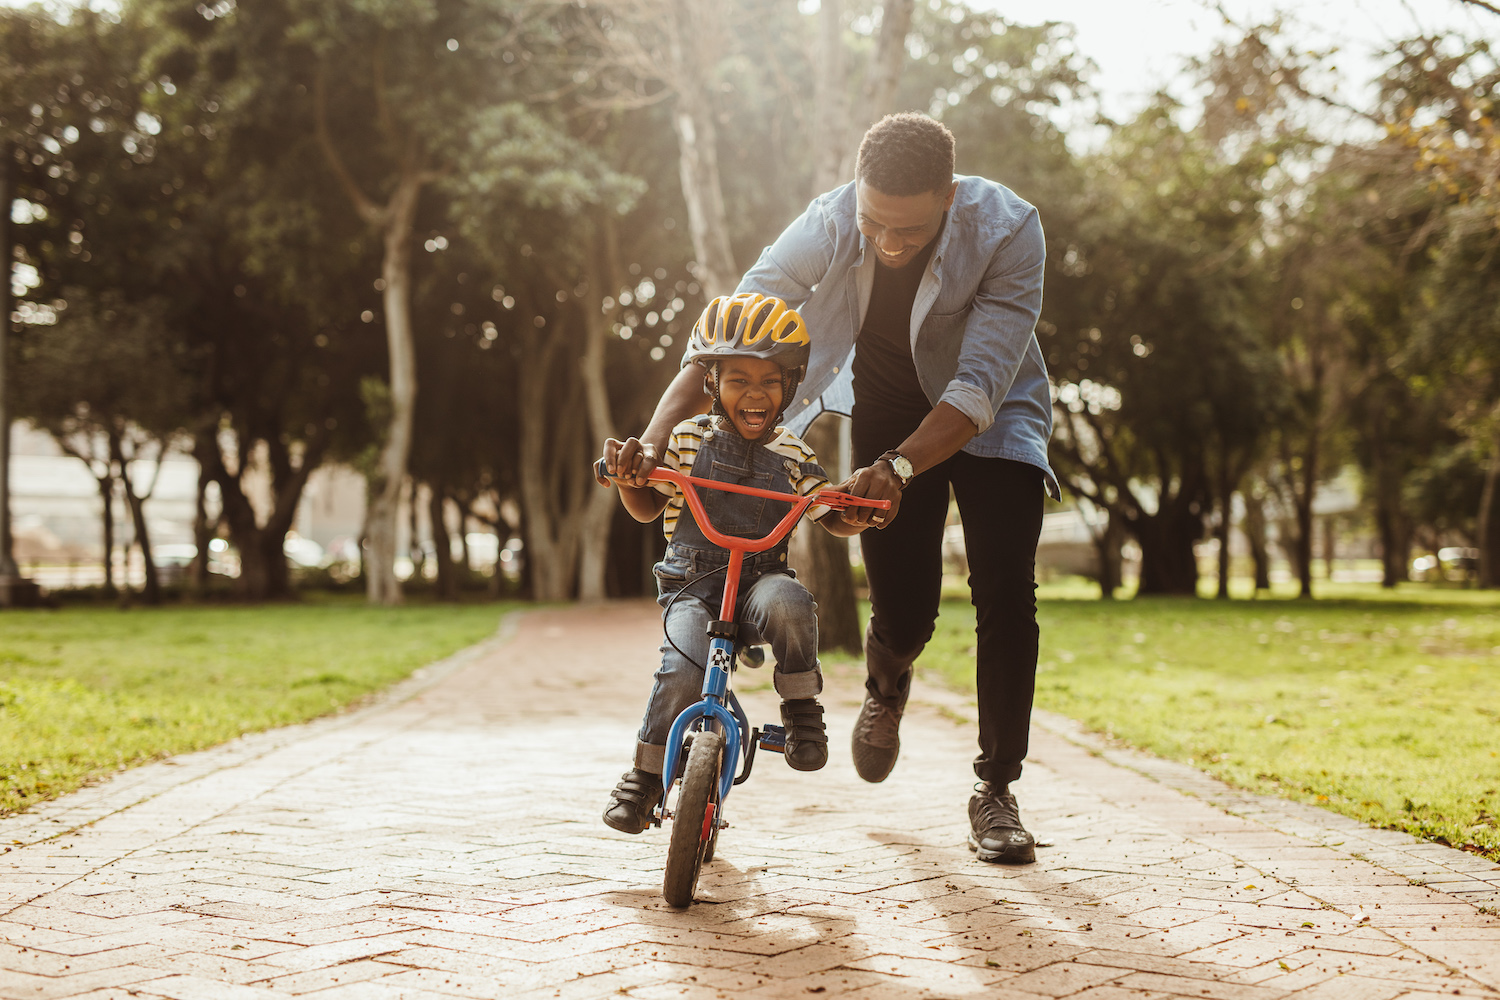 Dad helping his son learn how to ride a bike on a path through a park